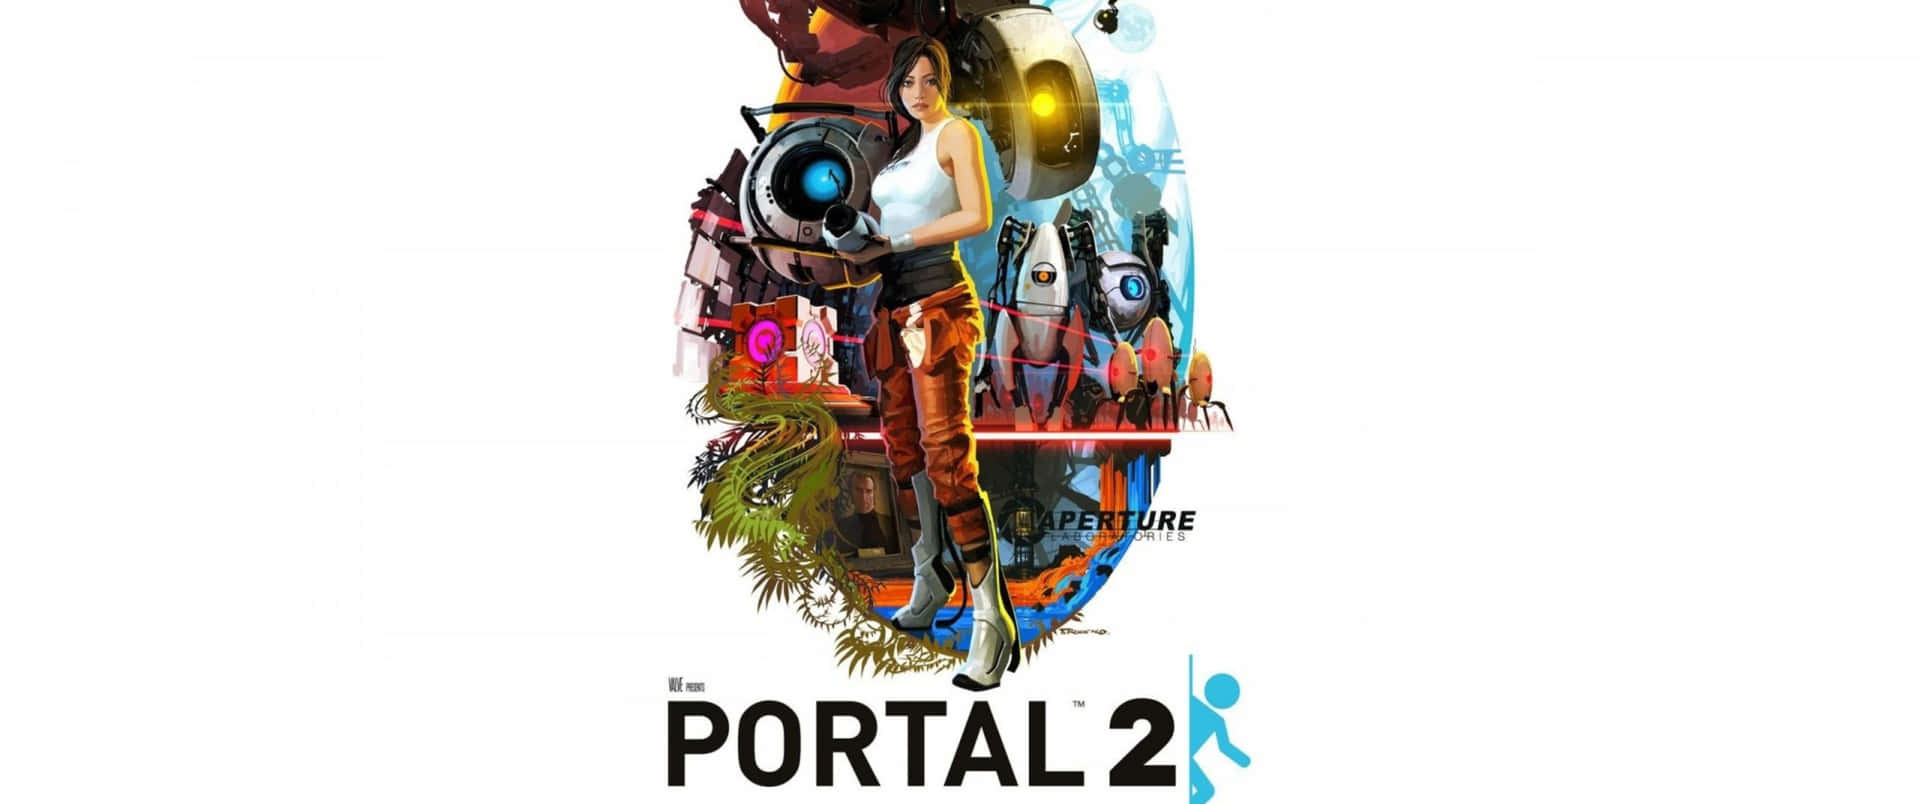 Fly through the corridors of Aperture Science in Portal 2